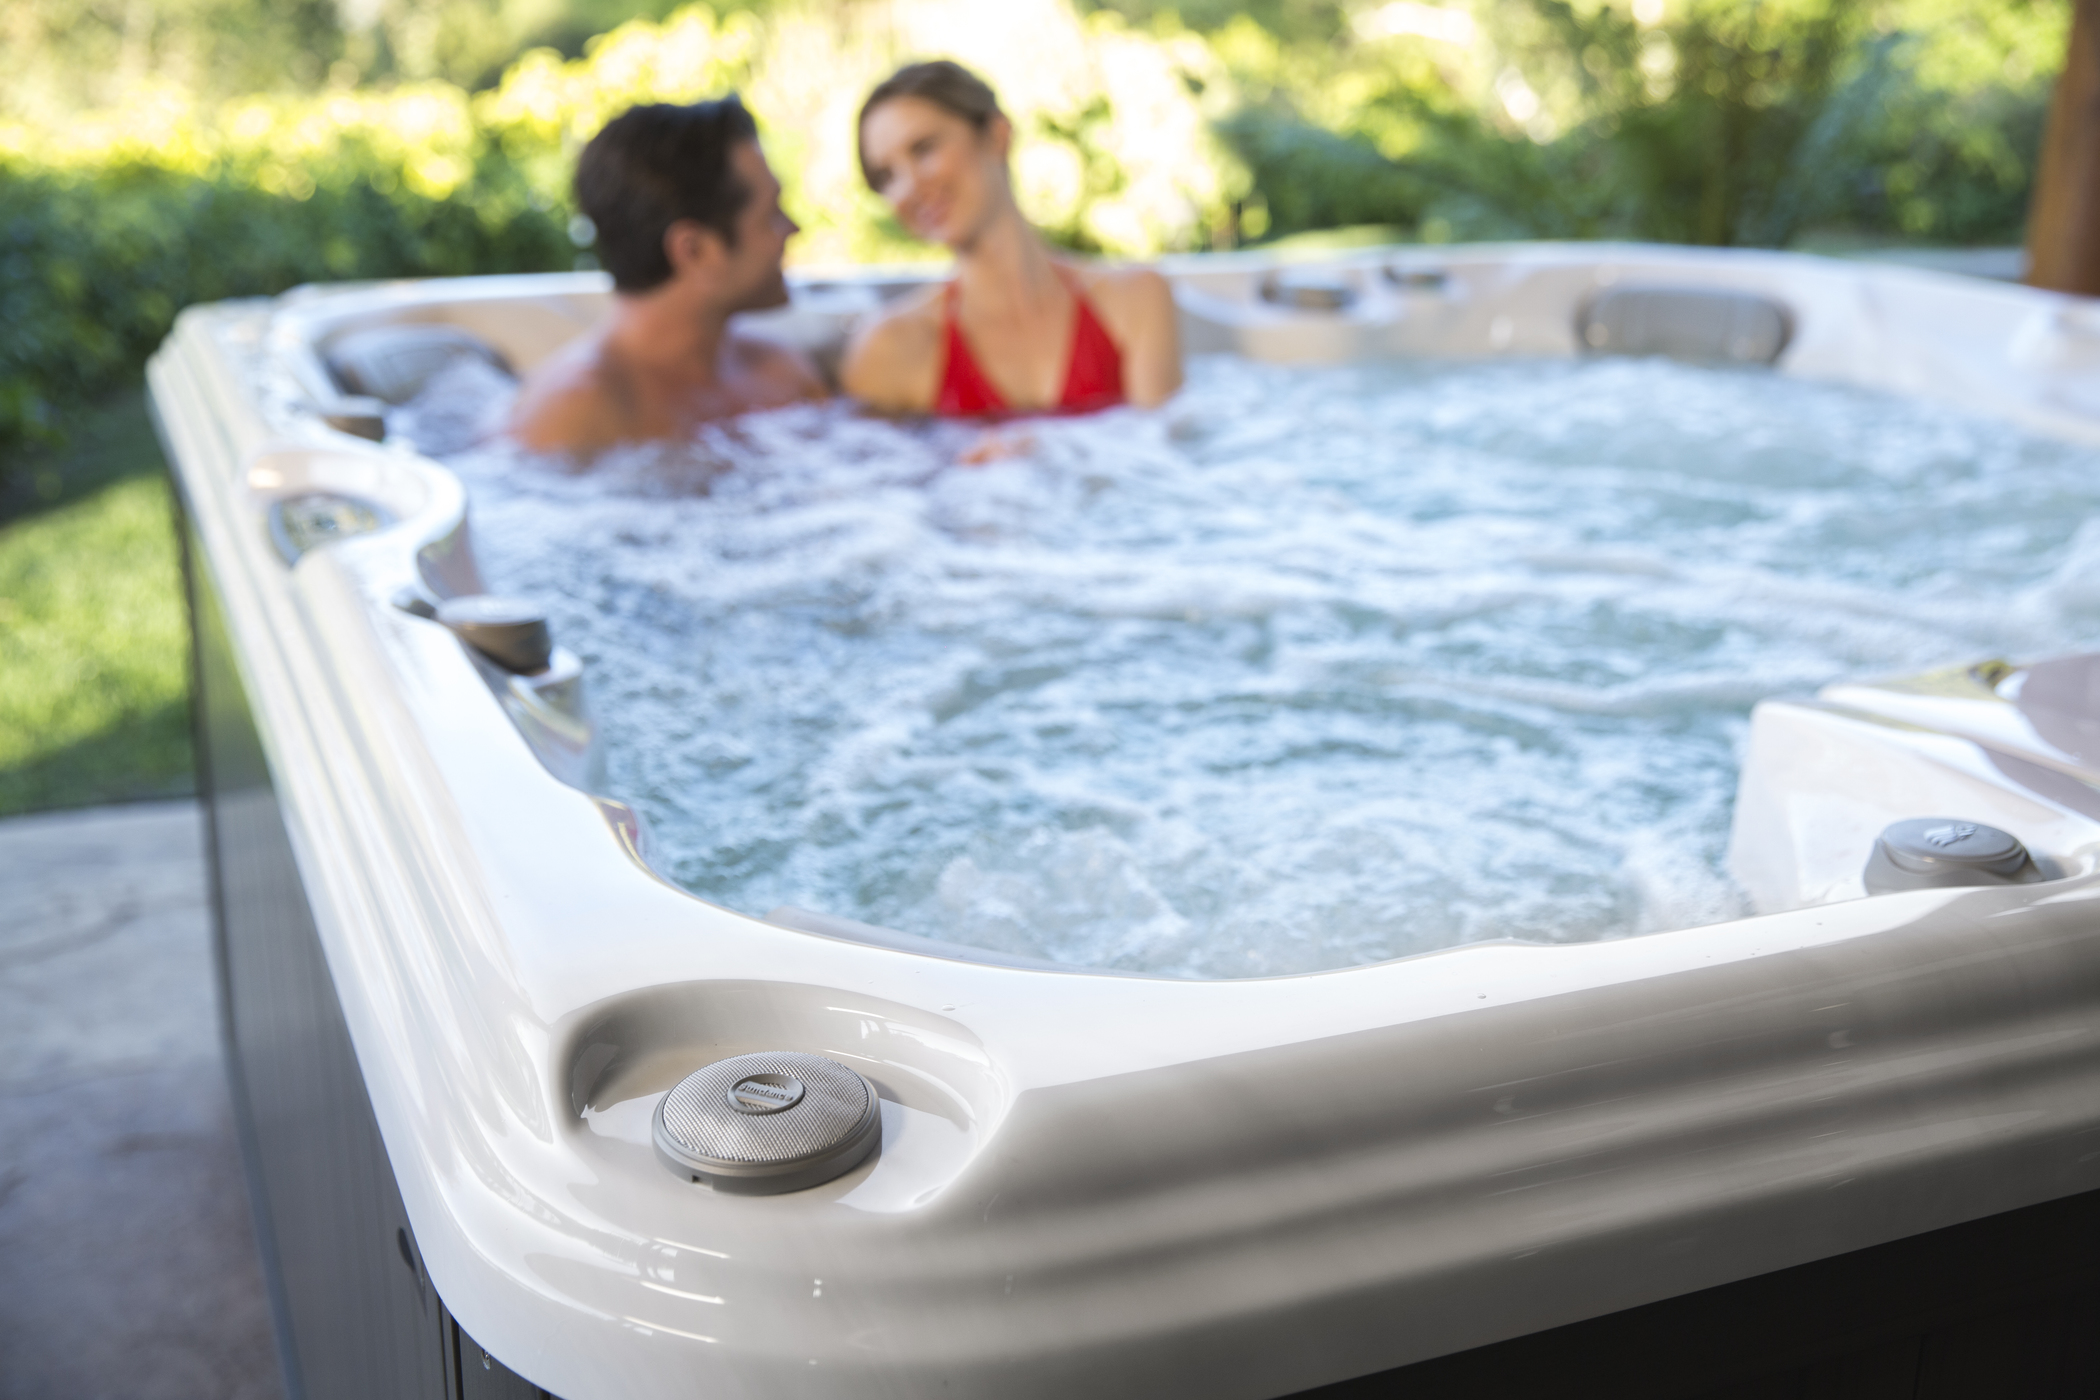 Man and woman in a 6-person hot tub.